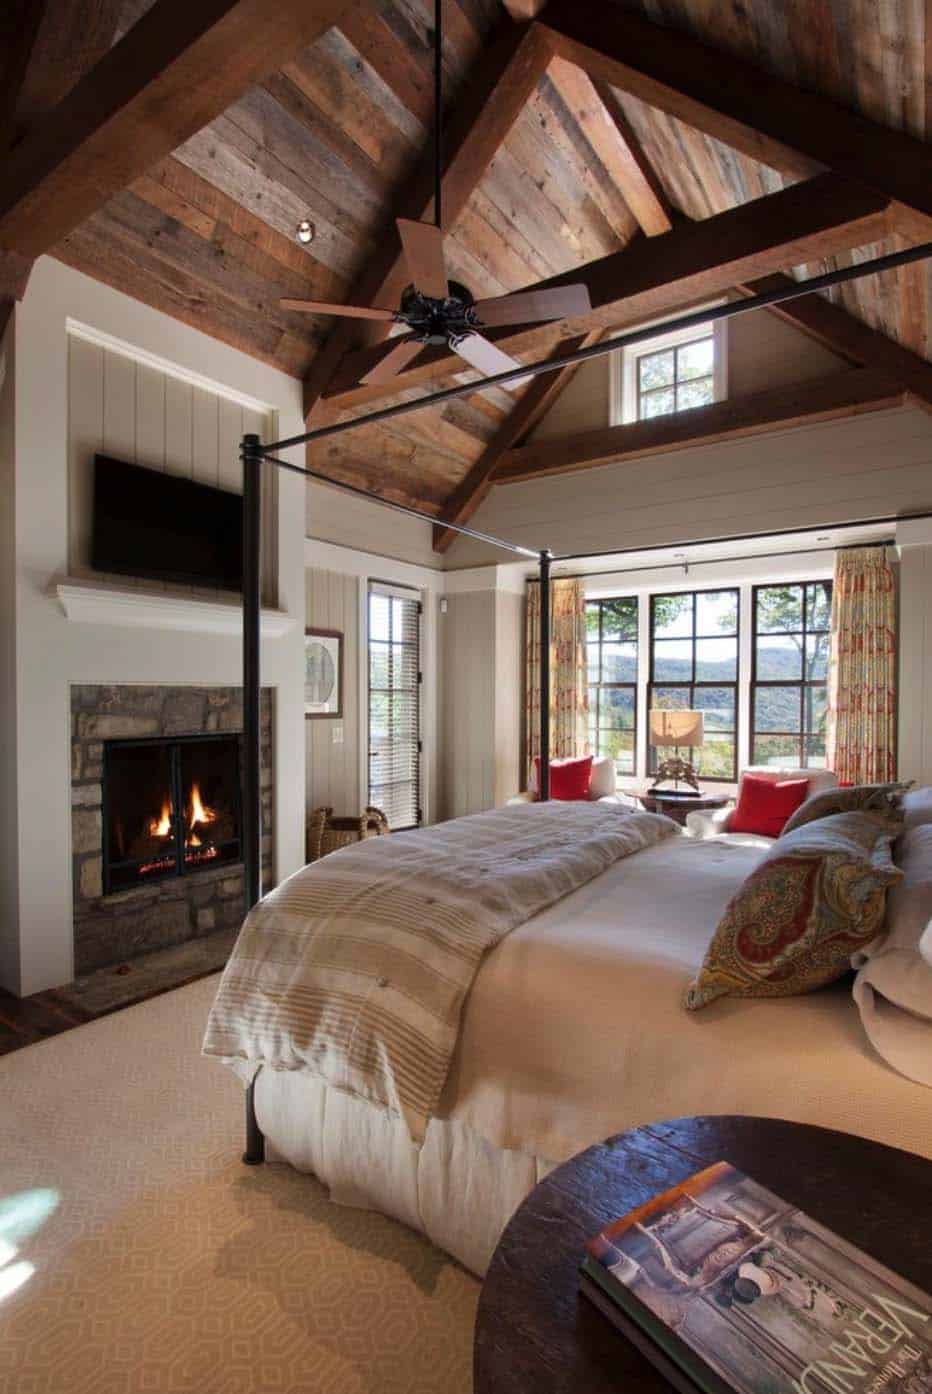 33 Stunning Master Bedroom Retreats With Vaulted Ceilings - How To Decorate Bedroom With High Ceilings